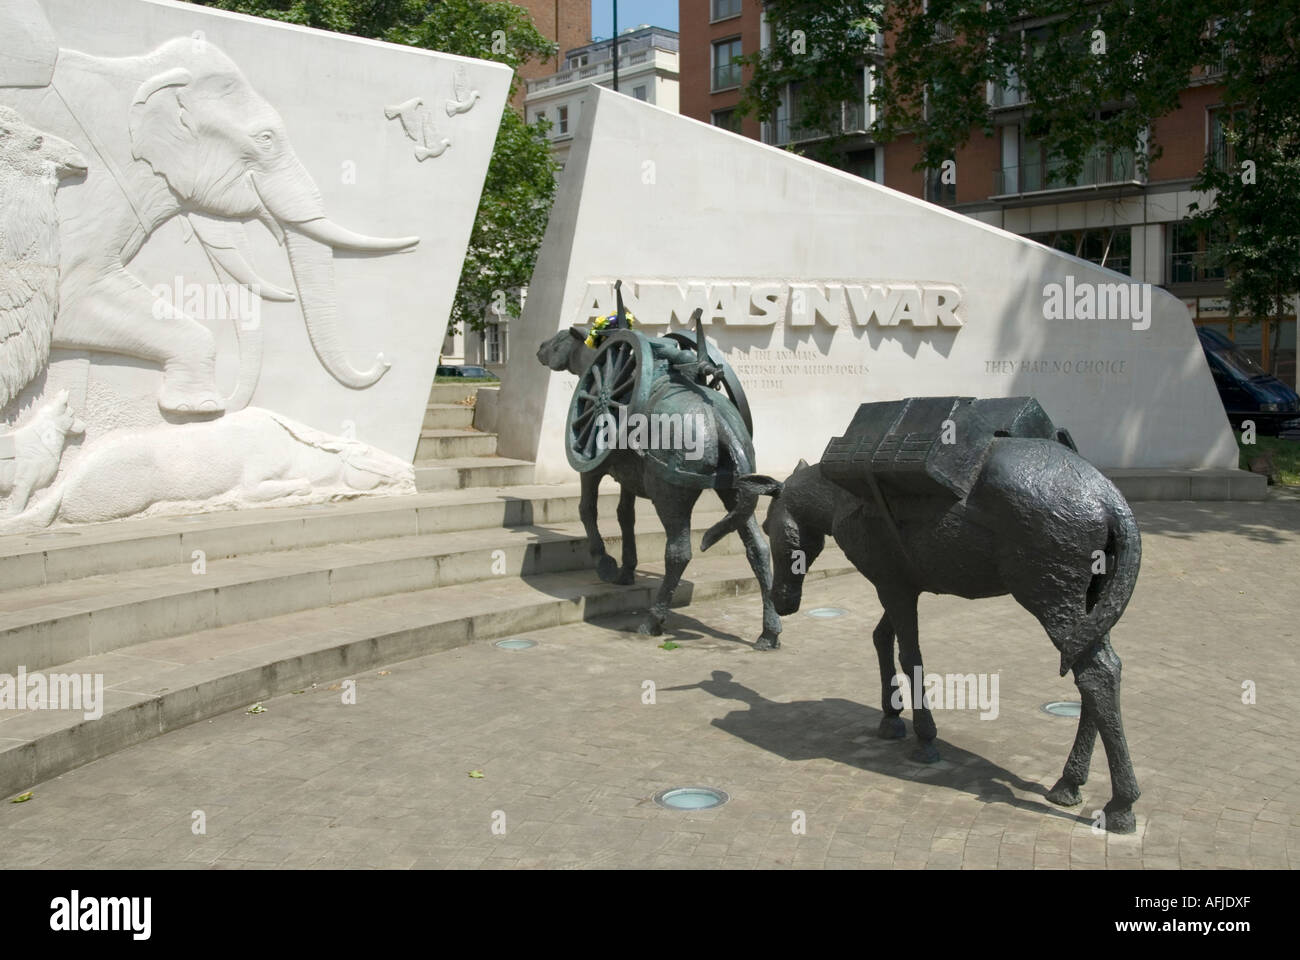 Animals in War memorial bronze mules & curved Portland stone wall sculpture  by English sculptor David Backhouse Park Lane Hyde Park London England UK  Stock Photo - Alamy